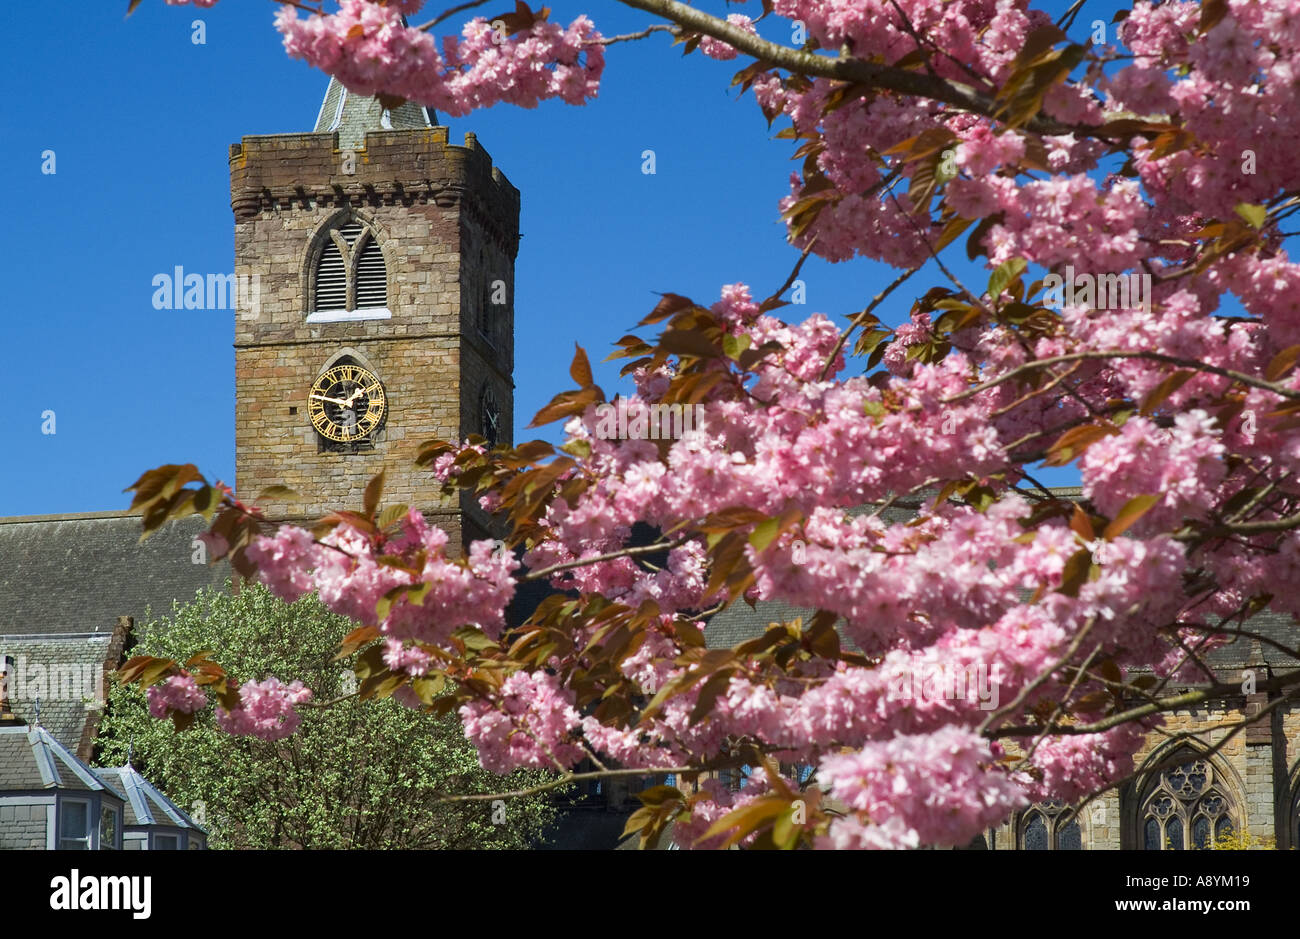 dh Dunblane cathedral DUNBLANE STIRLINGSHIRE UK Church clock tower springtime cherry blossom tree branches scotland Stock Photo